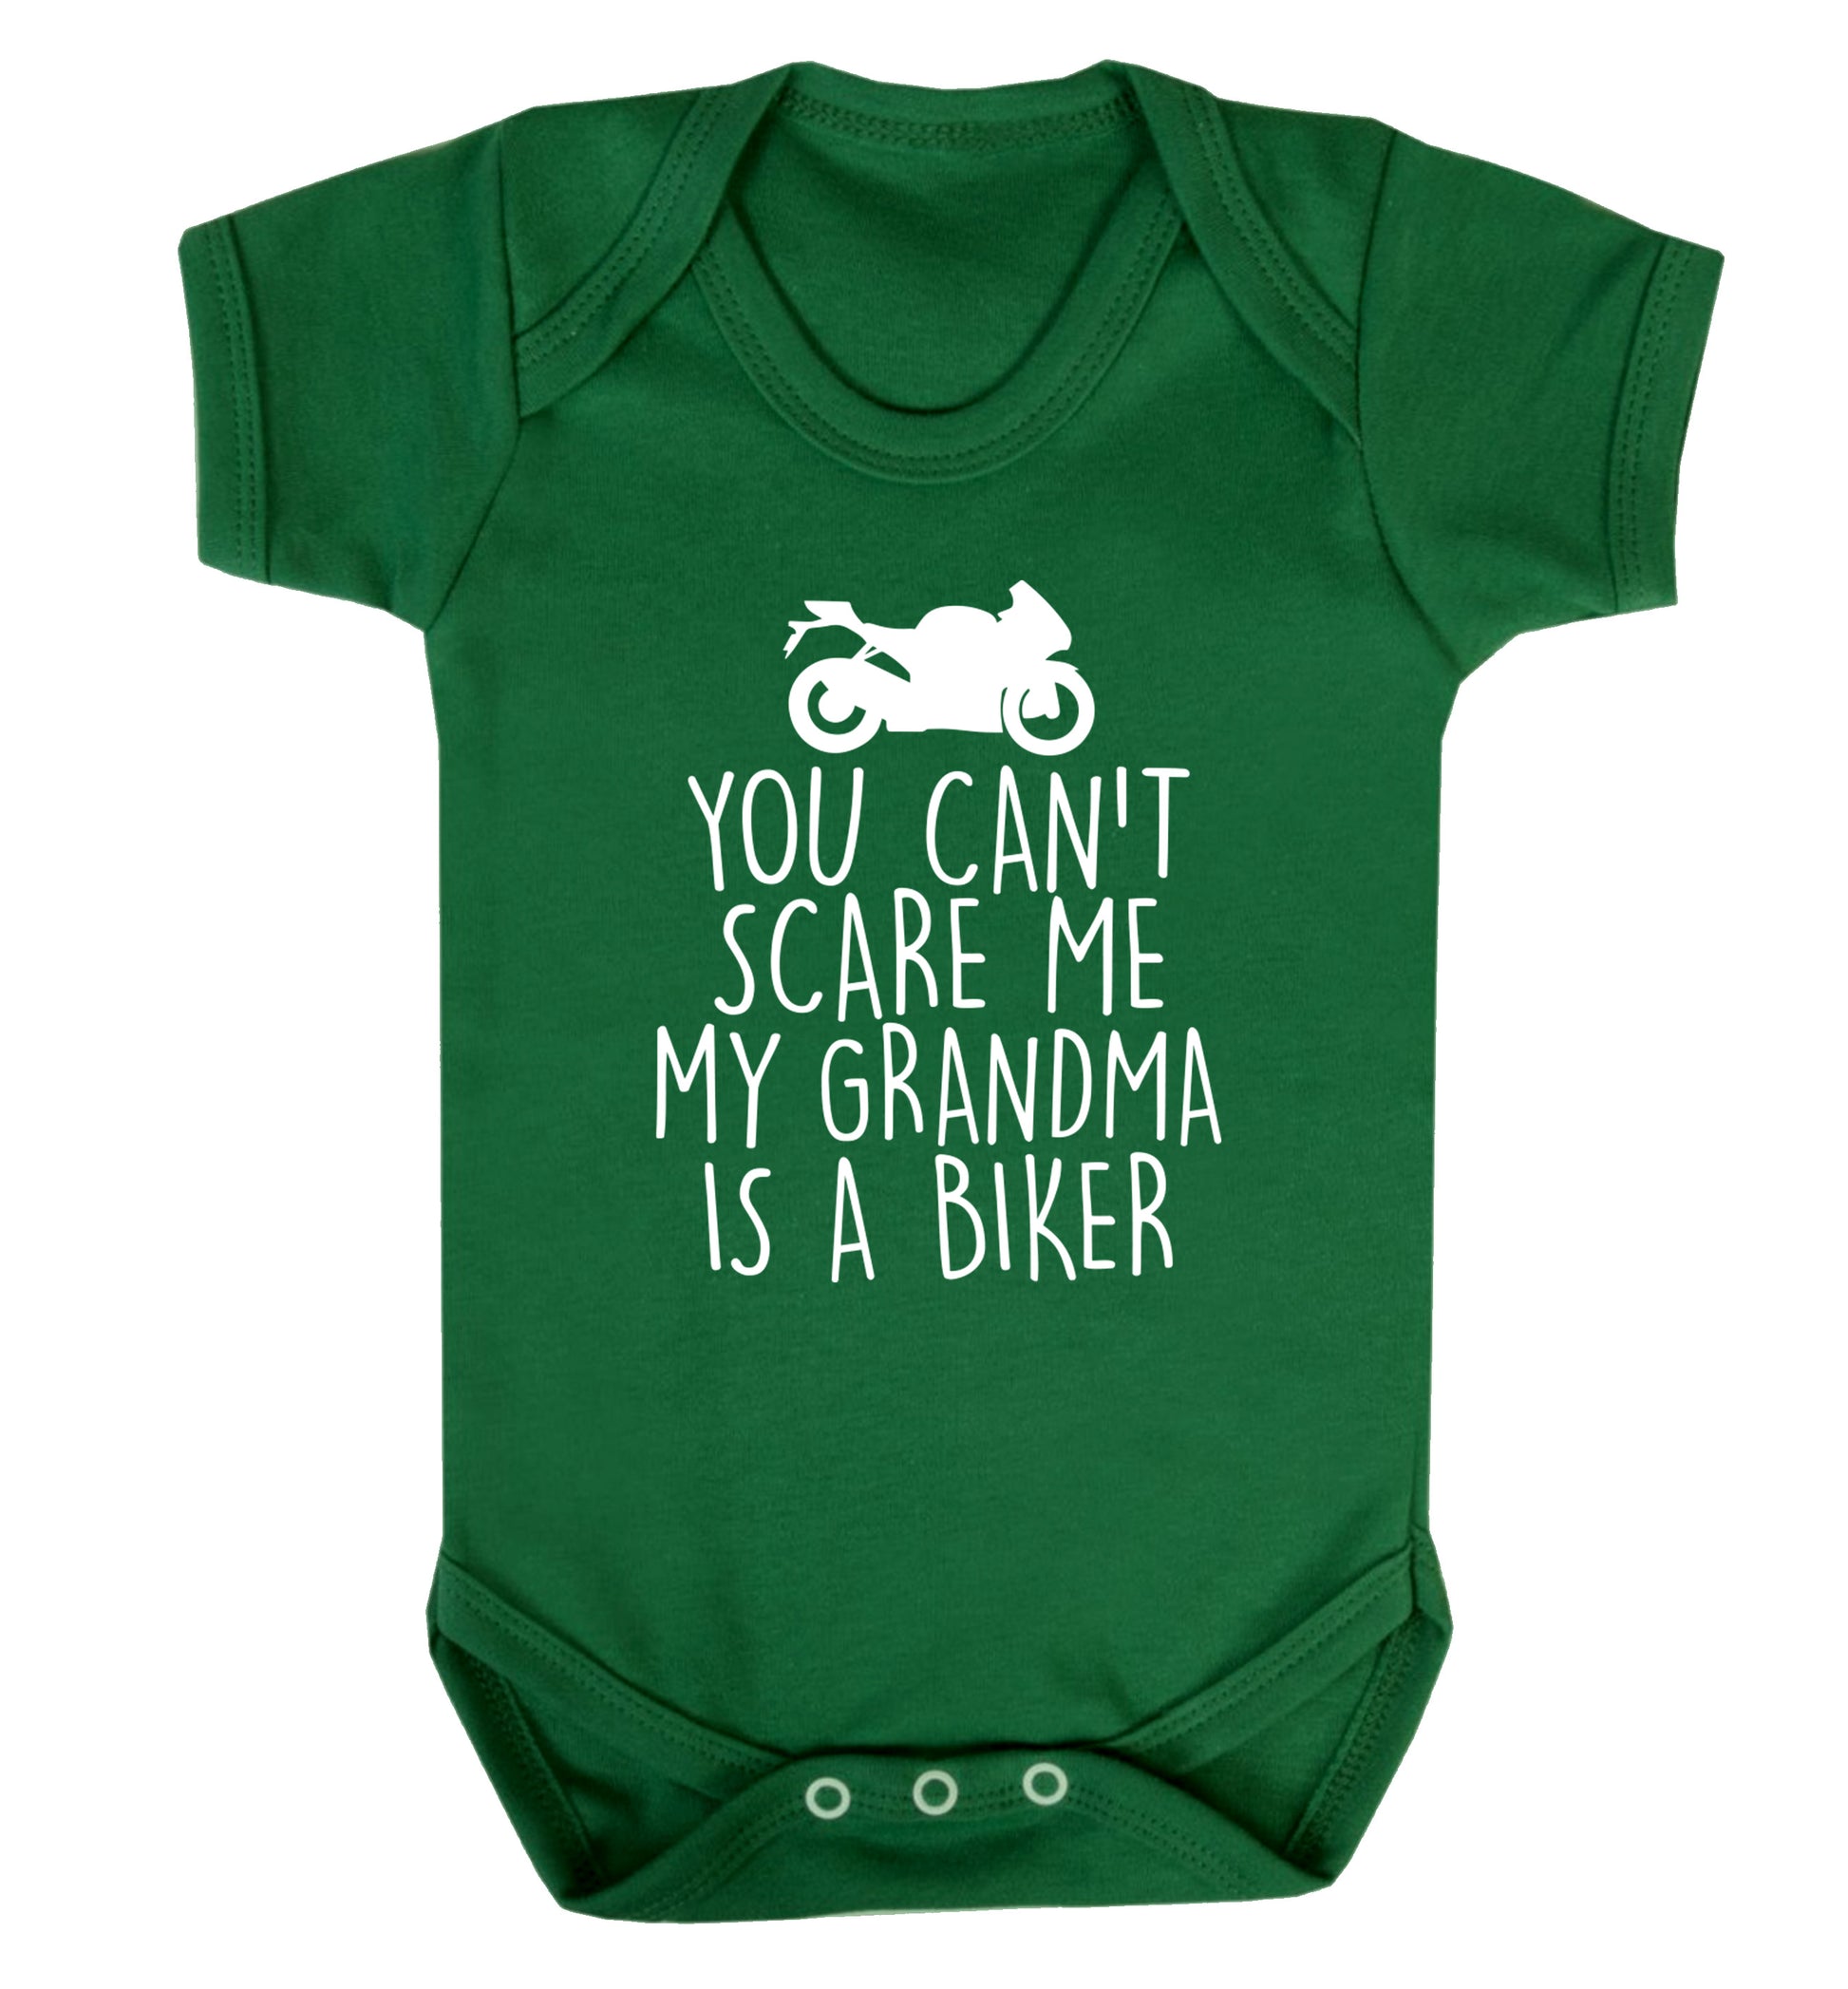 You can't scare me my grandma is a biker Baby Vest green 18-24 months